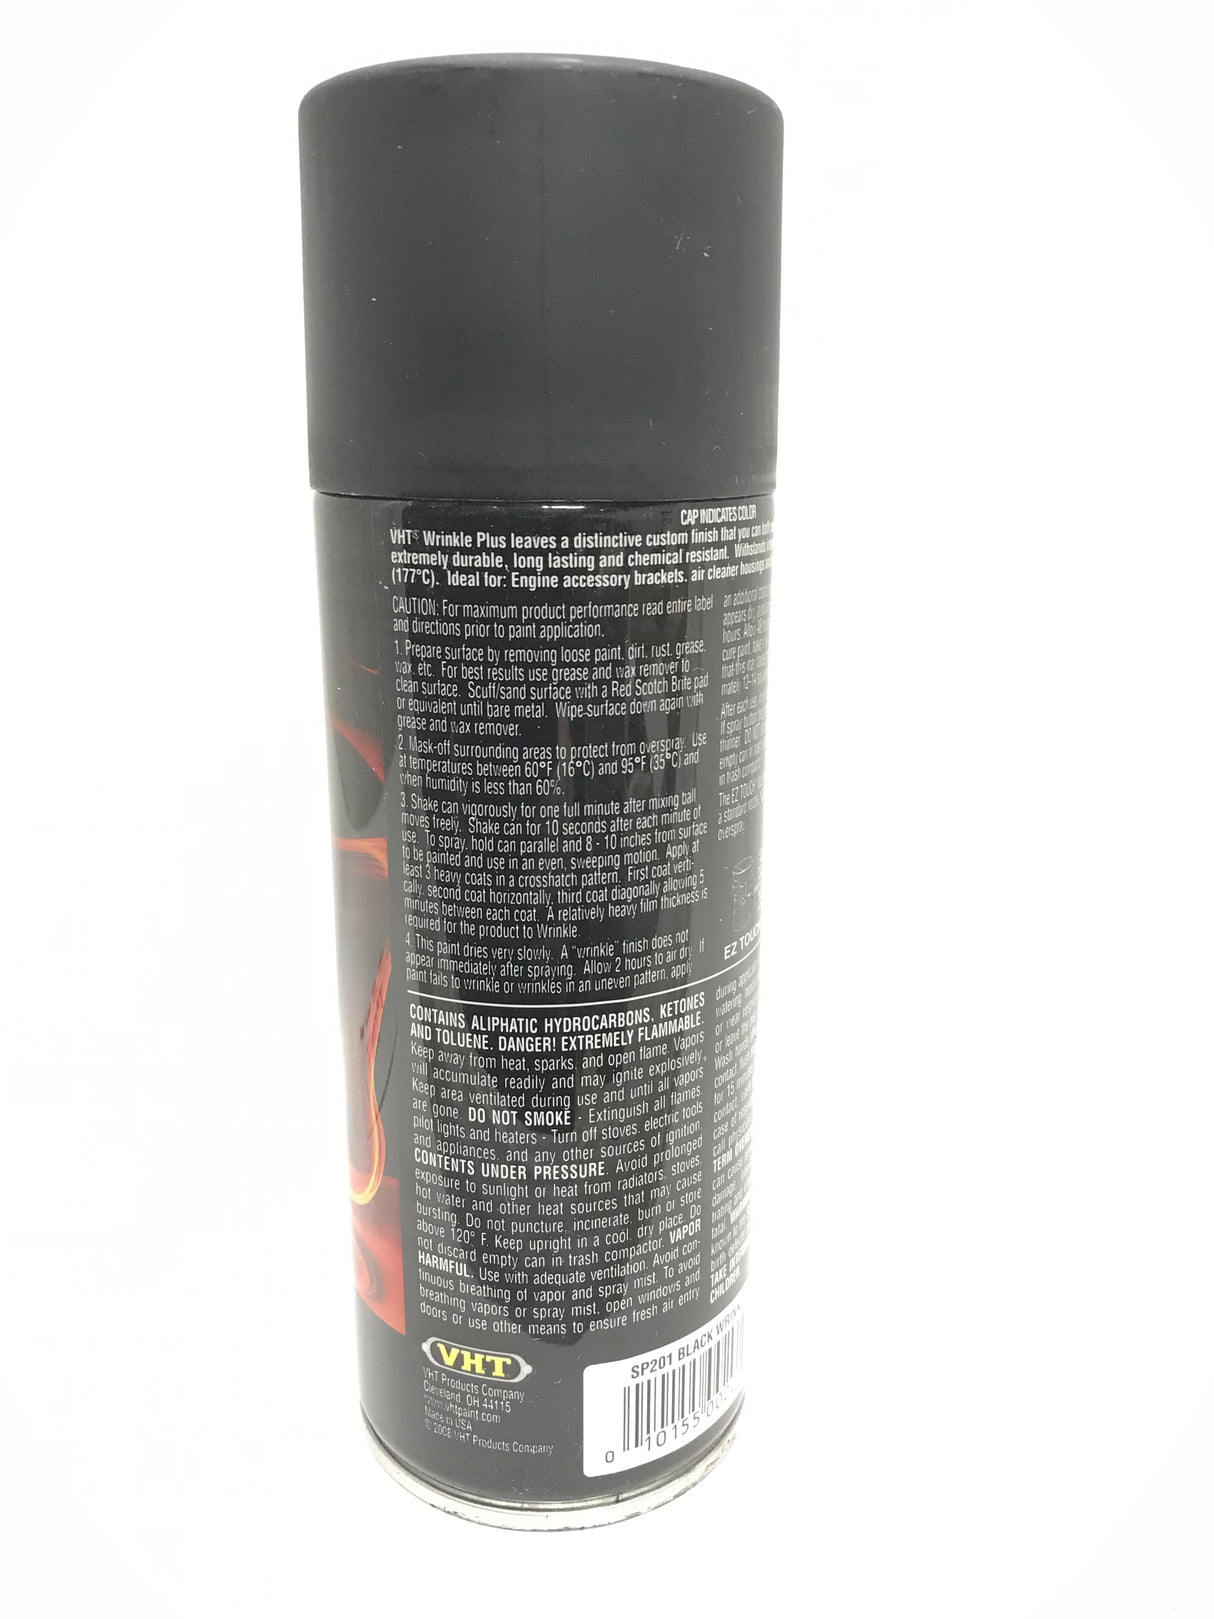 VHT SP201 BLACK High Temperature Wrinkle Finish Durable Texture Coating - 11 oz